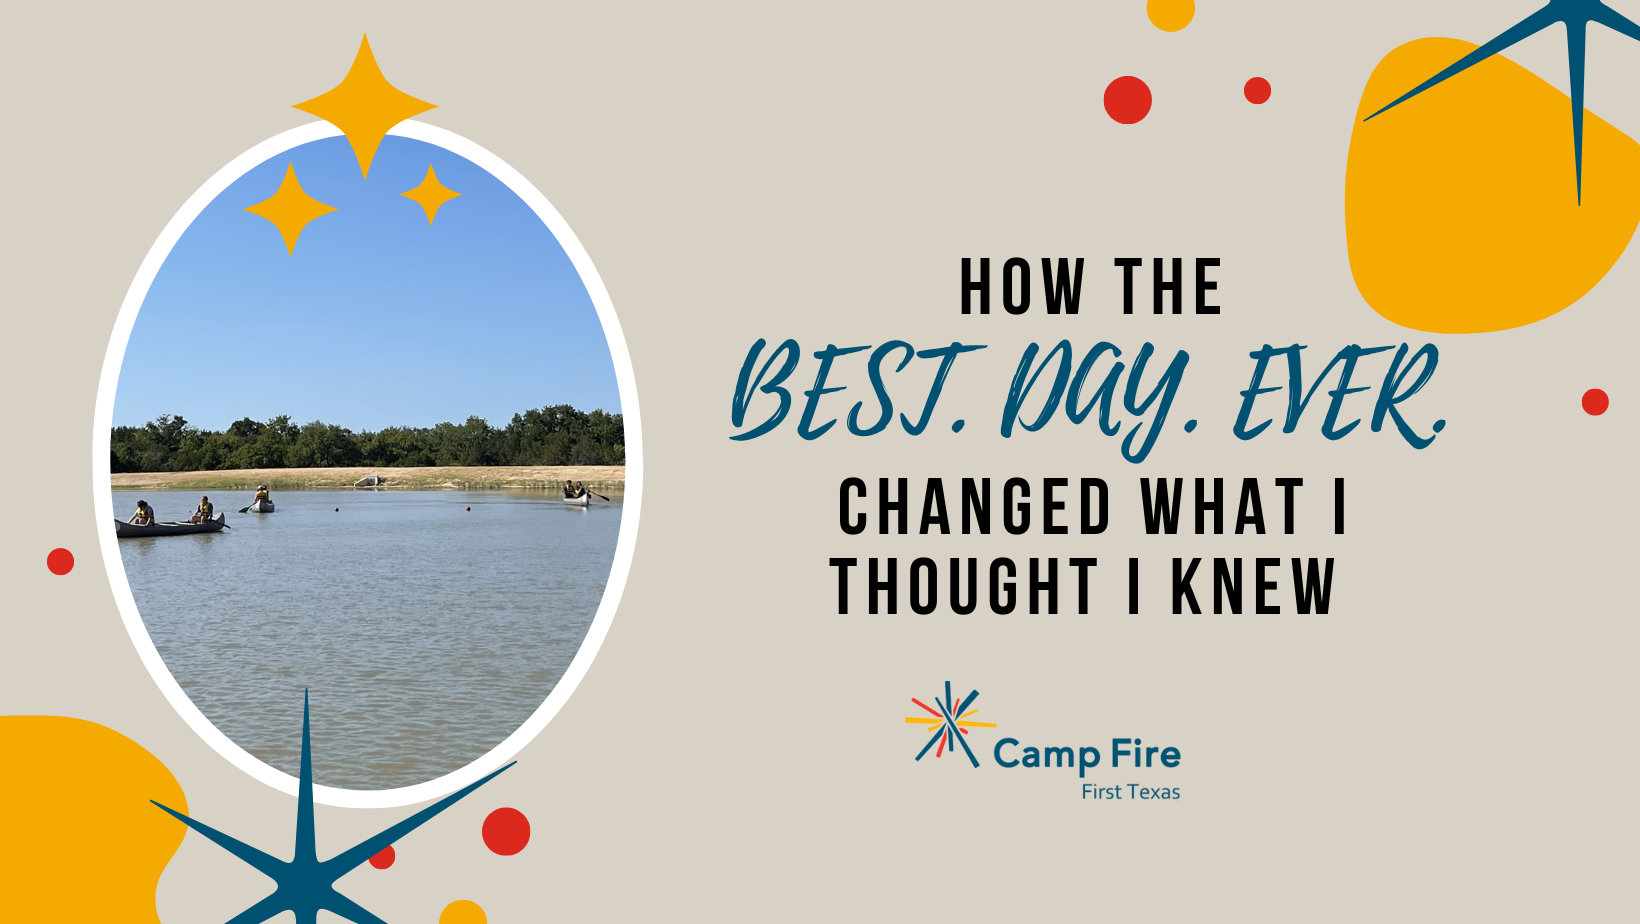 How the BEST. DAY. EVER. Changed What I Thought I Knew, a Camp Fire First Texas blog by Brian Miller